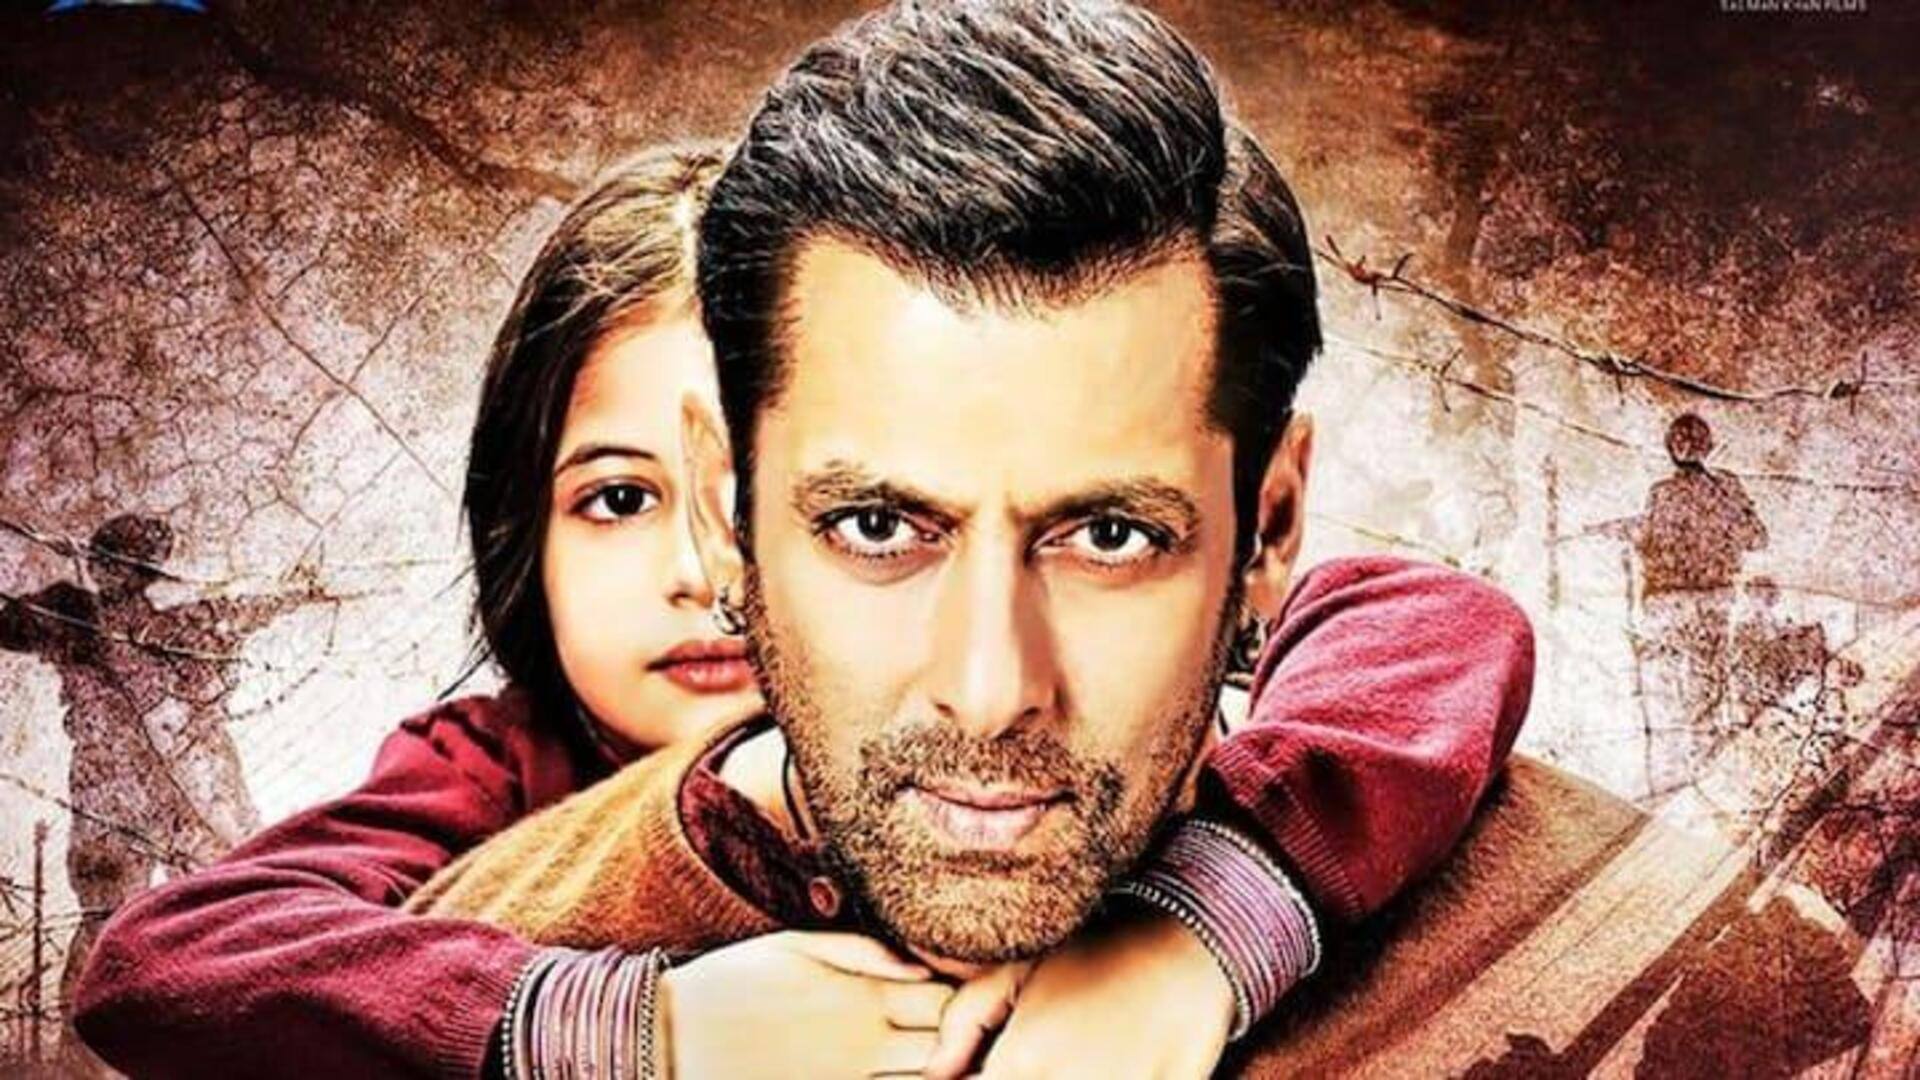 'Bajrangi Bhaijaan' sequel: Writing completed, Salman Khan's approval pending